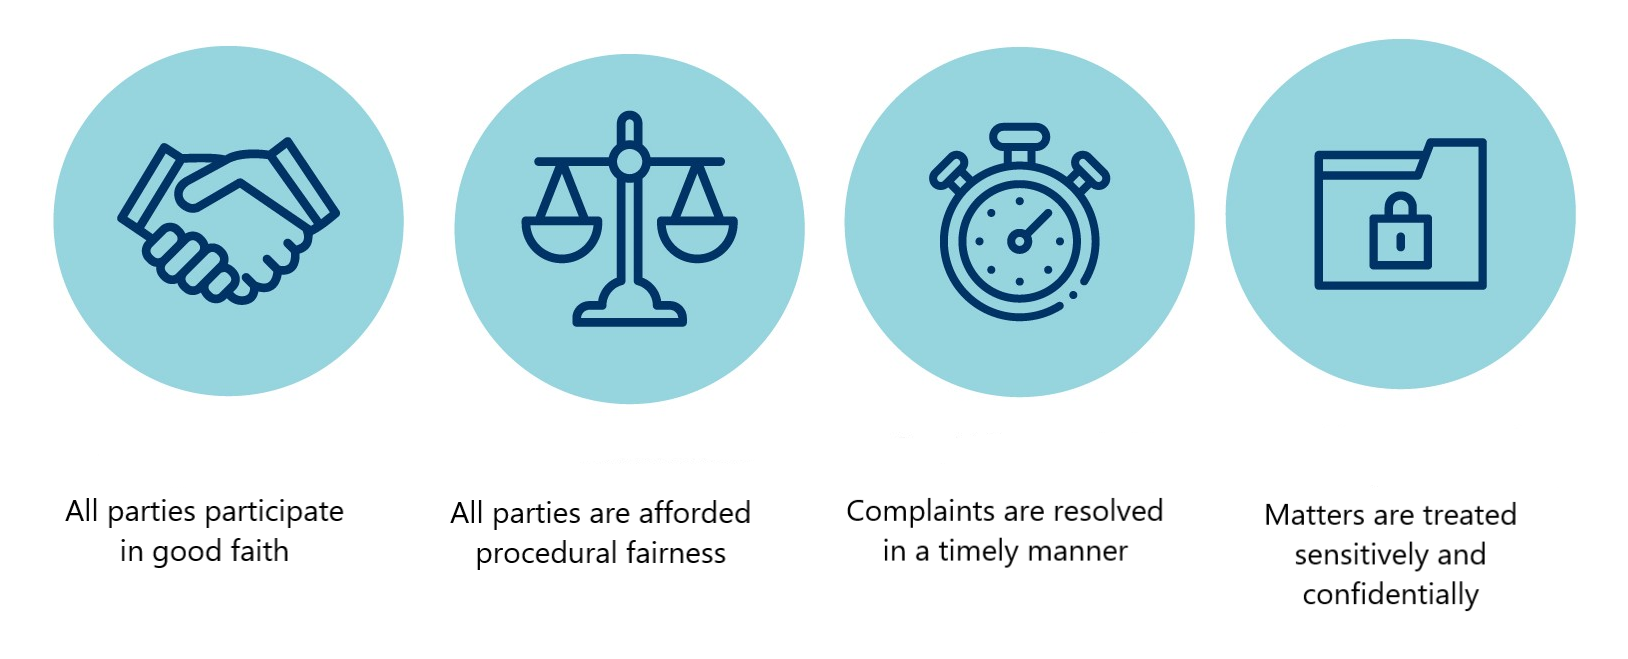 Complaints principles: all parties participate in good faith, afforded procedural fairness, are resolved in a timely manner and treated sensitively.